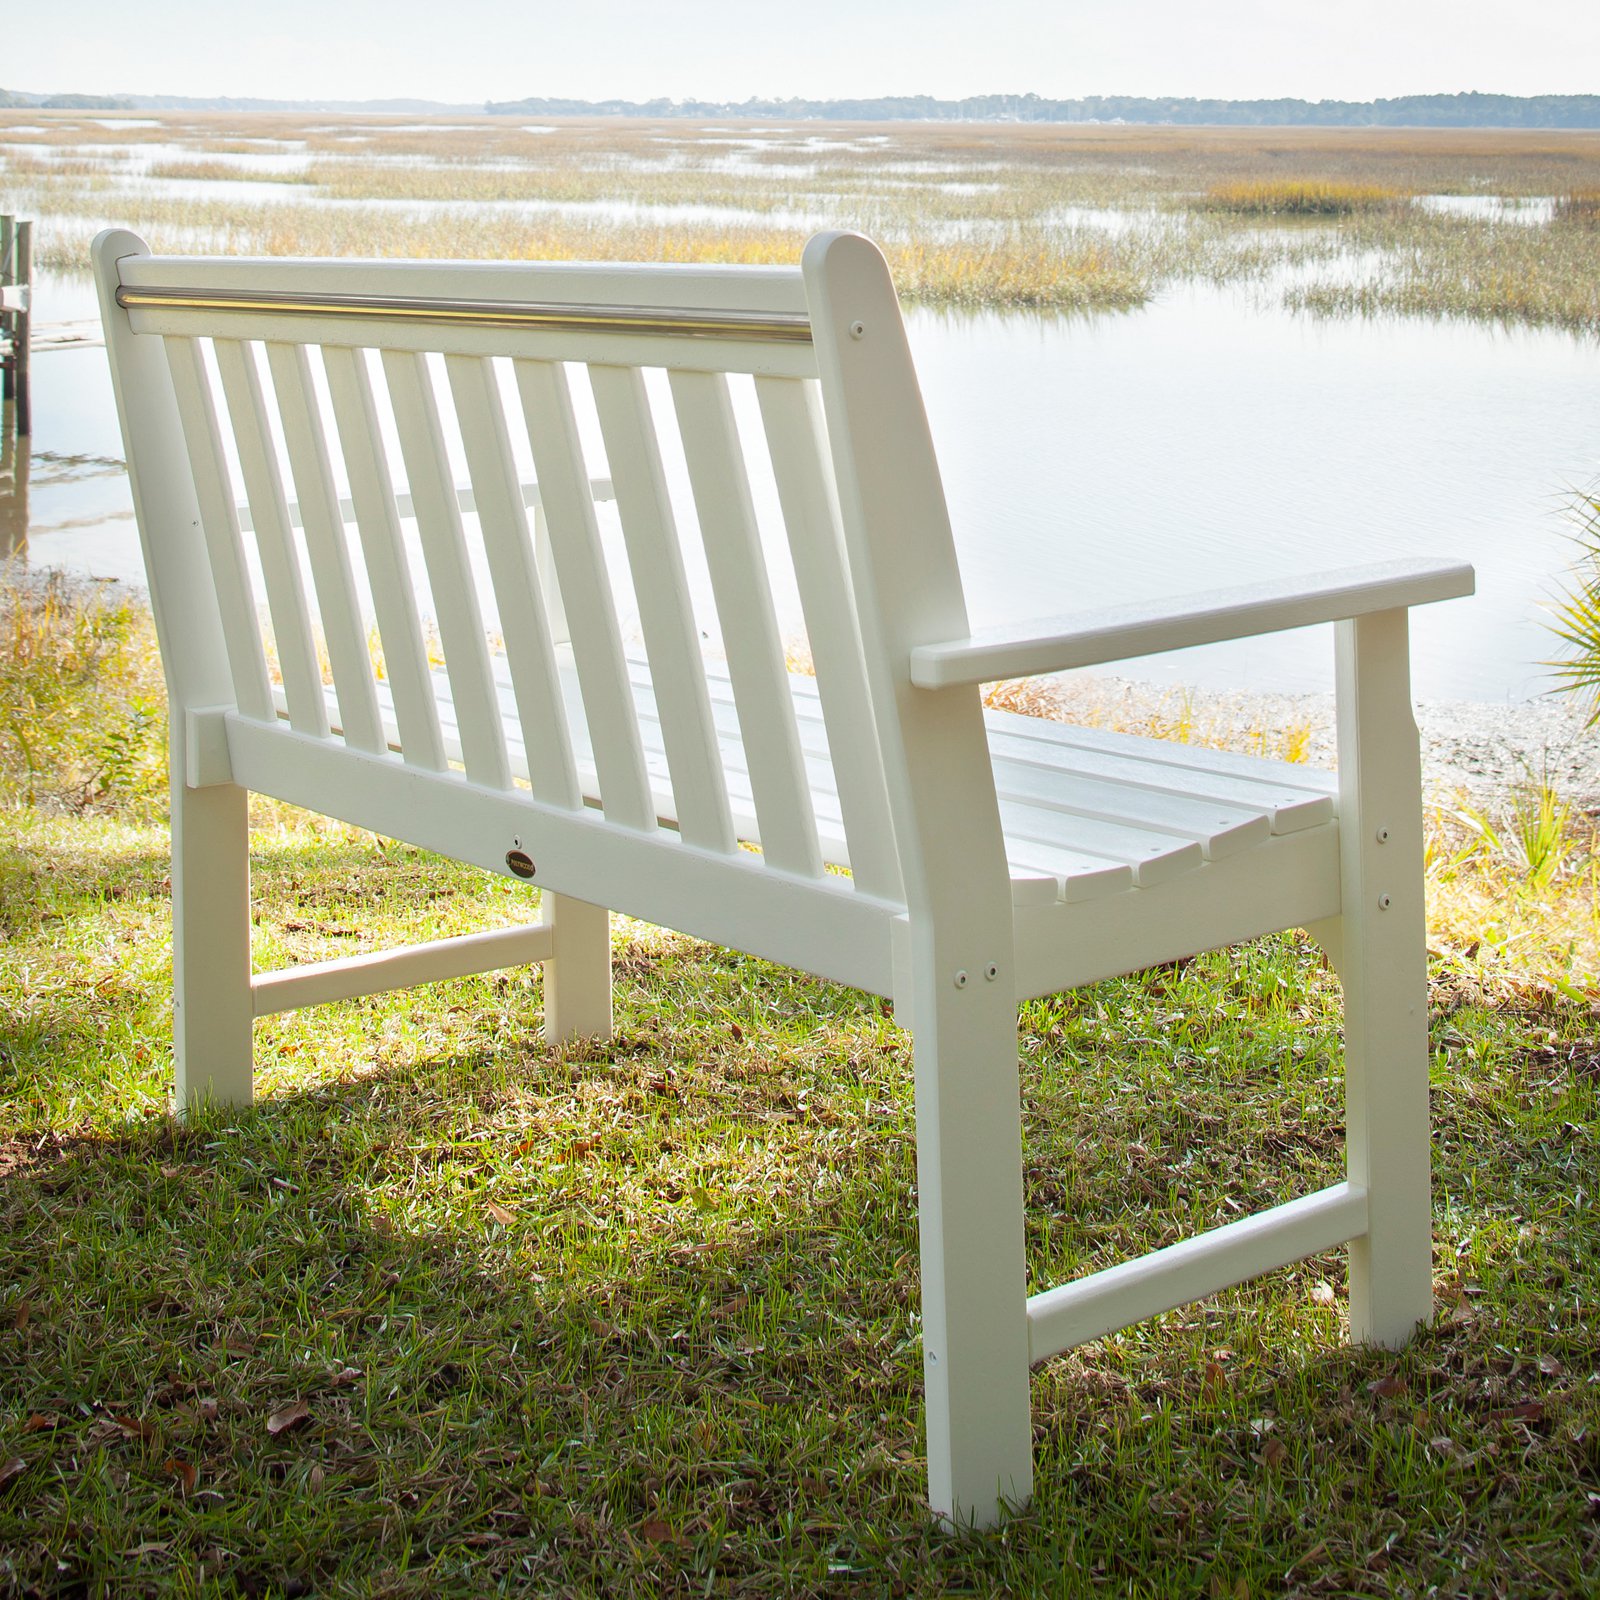 POLYWOOD Vineyard 48" Recycled Plastic Garden Bench - image 5 of 9